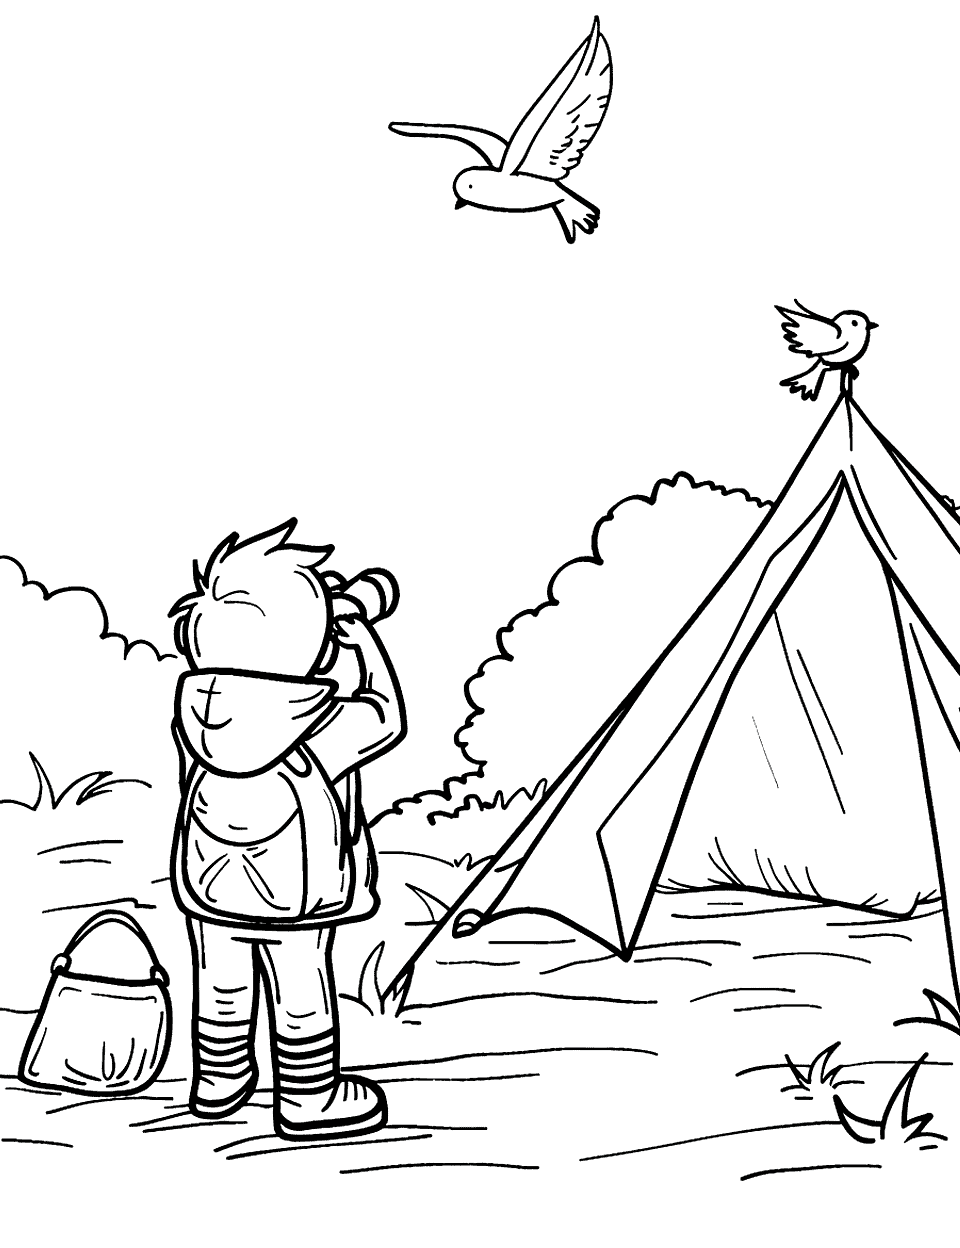 Campsite Bird Watching Camping Coloring Page - A child with binoculars, looking at birds from their campsite.